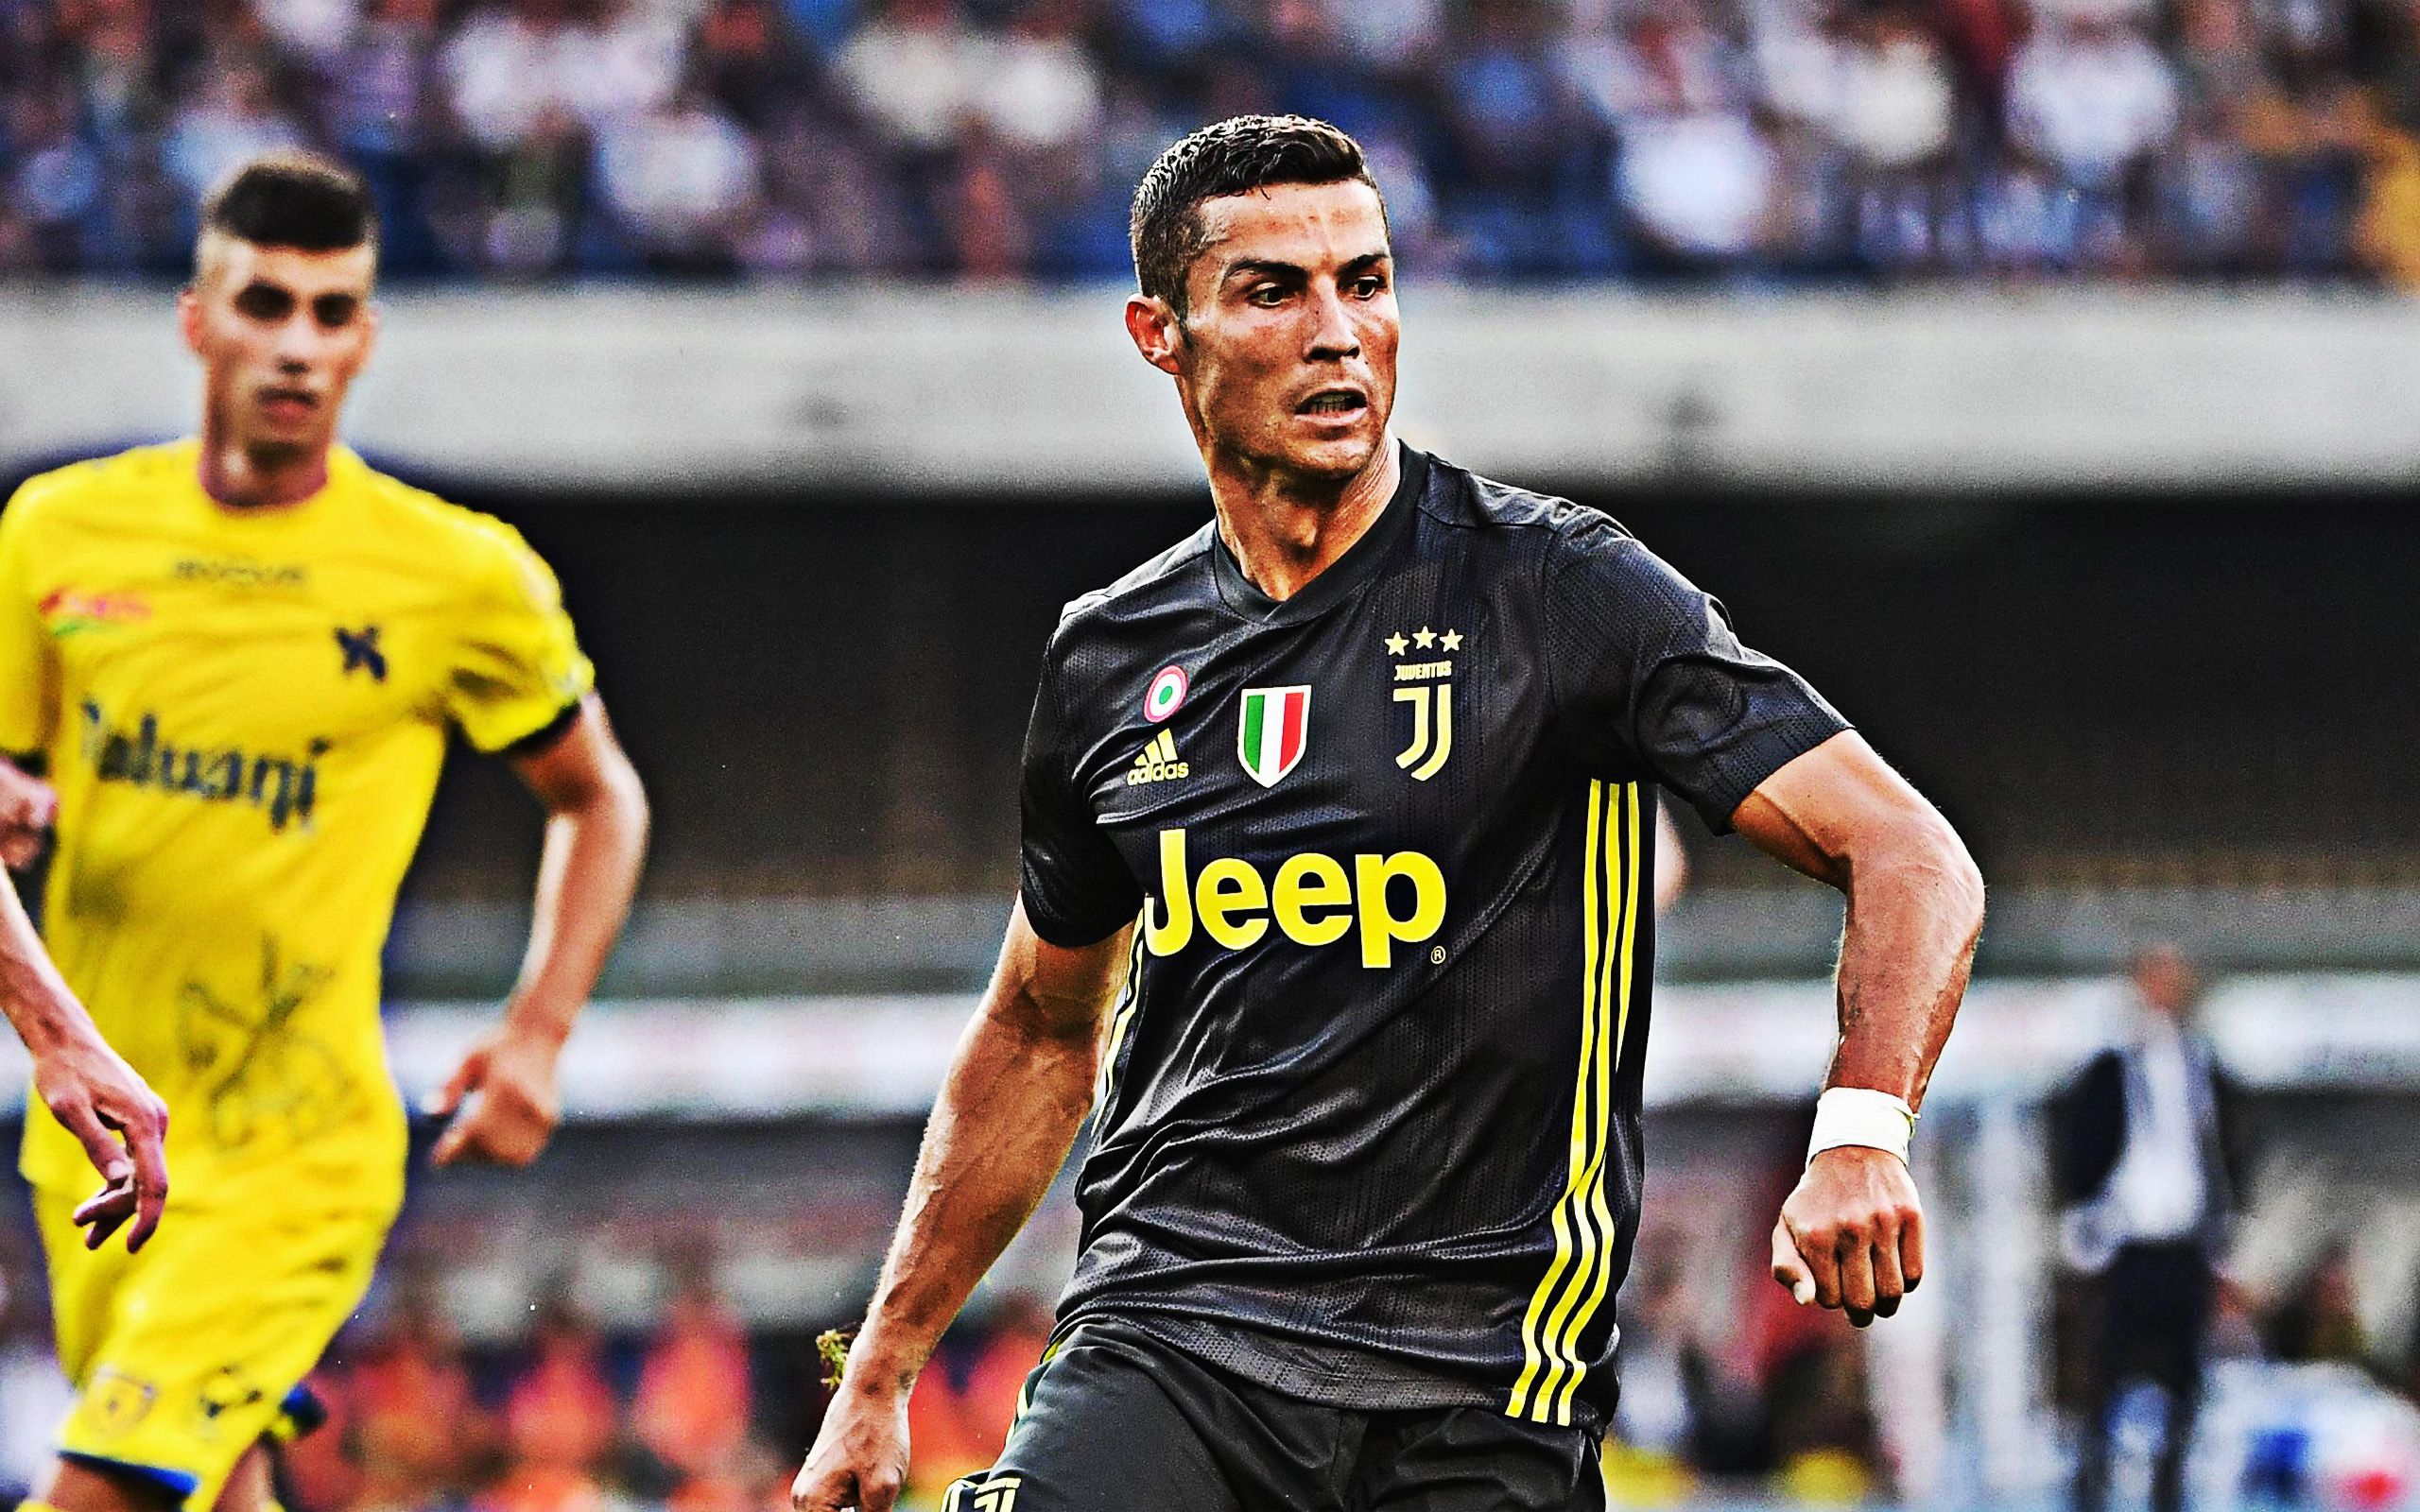 Download wallpaper Cristiano Ronaldo, Juventus FC, football, world football star, Serie A, Italy, Champions League, Portuguese football players, CR Juve for desktop with resolution 2560x1600. High Quality HD picture wallpaper